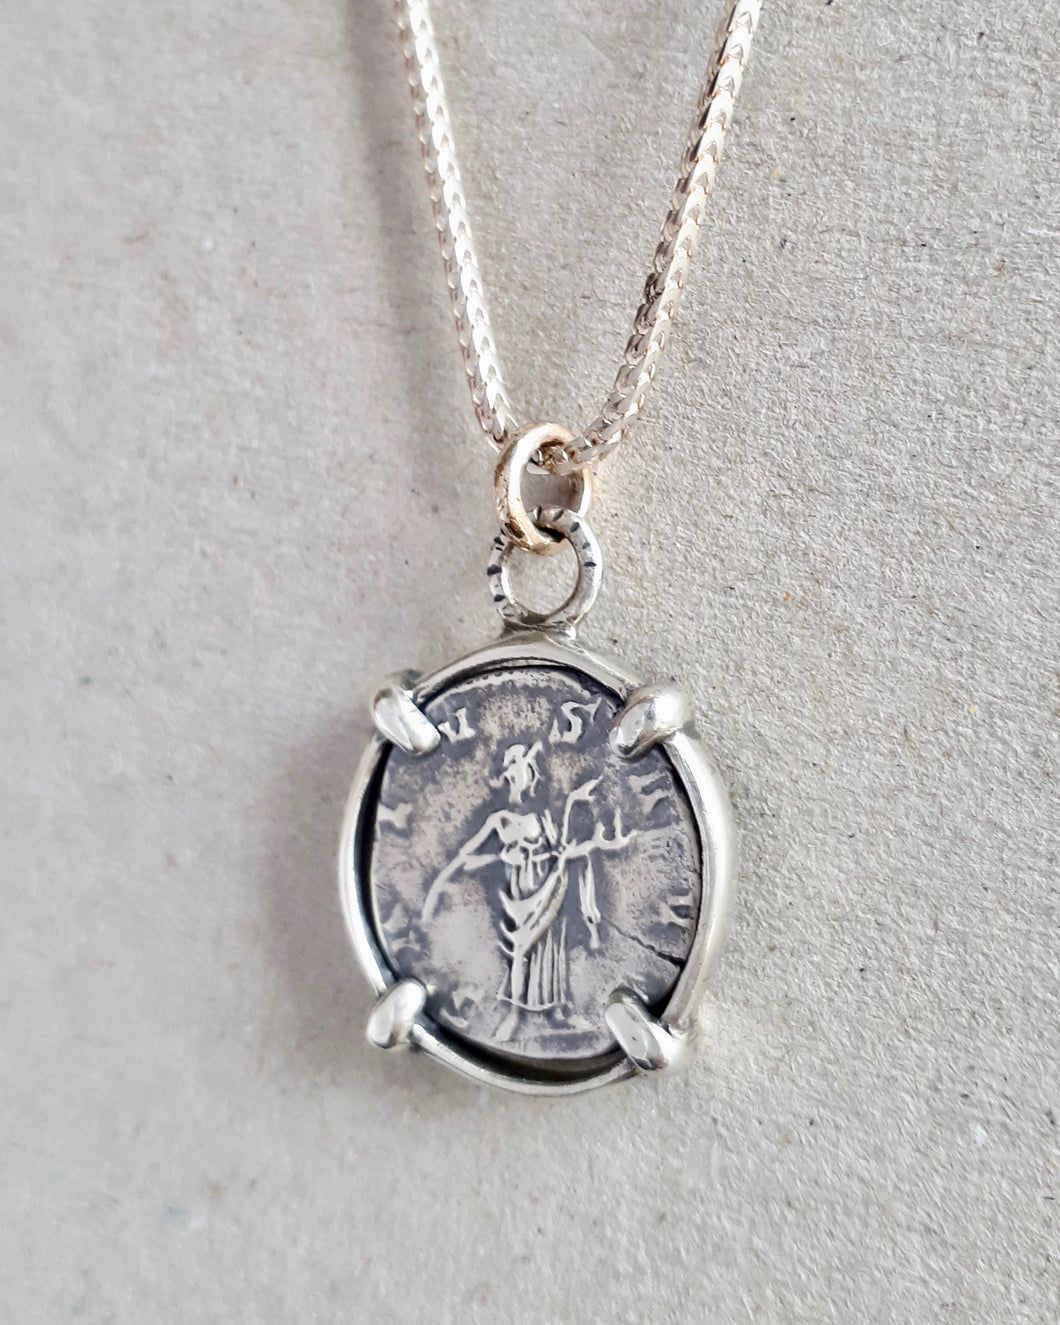 10k gold and sterling silver necklace featuring an ancient Roman coin Salus, goddess of health and safety.